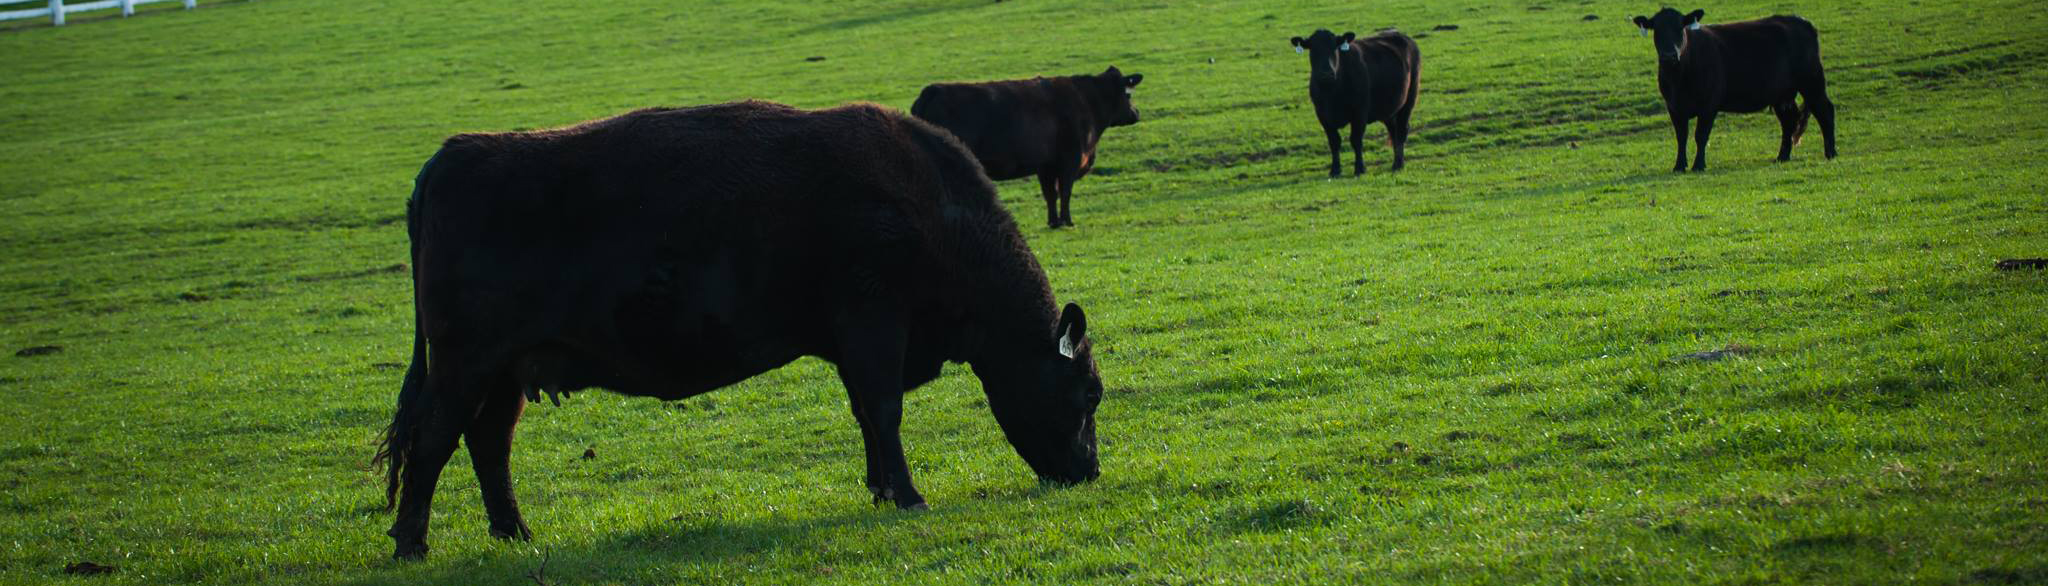 narrow image of cows grazing